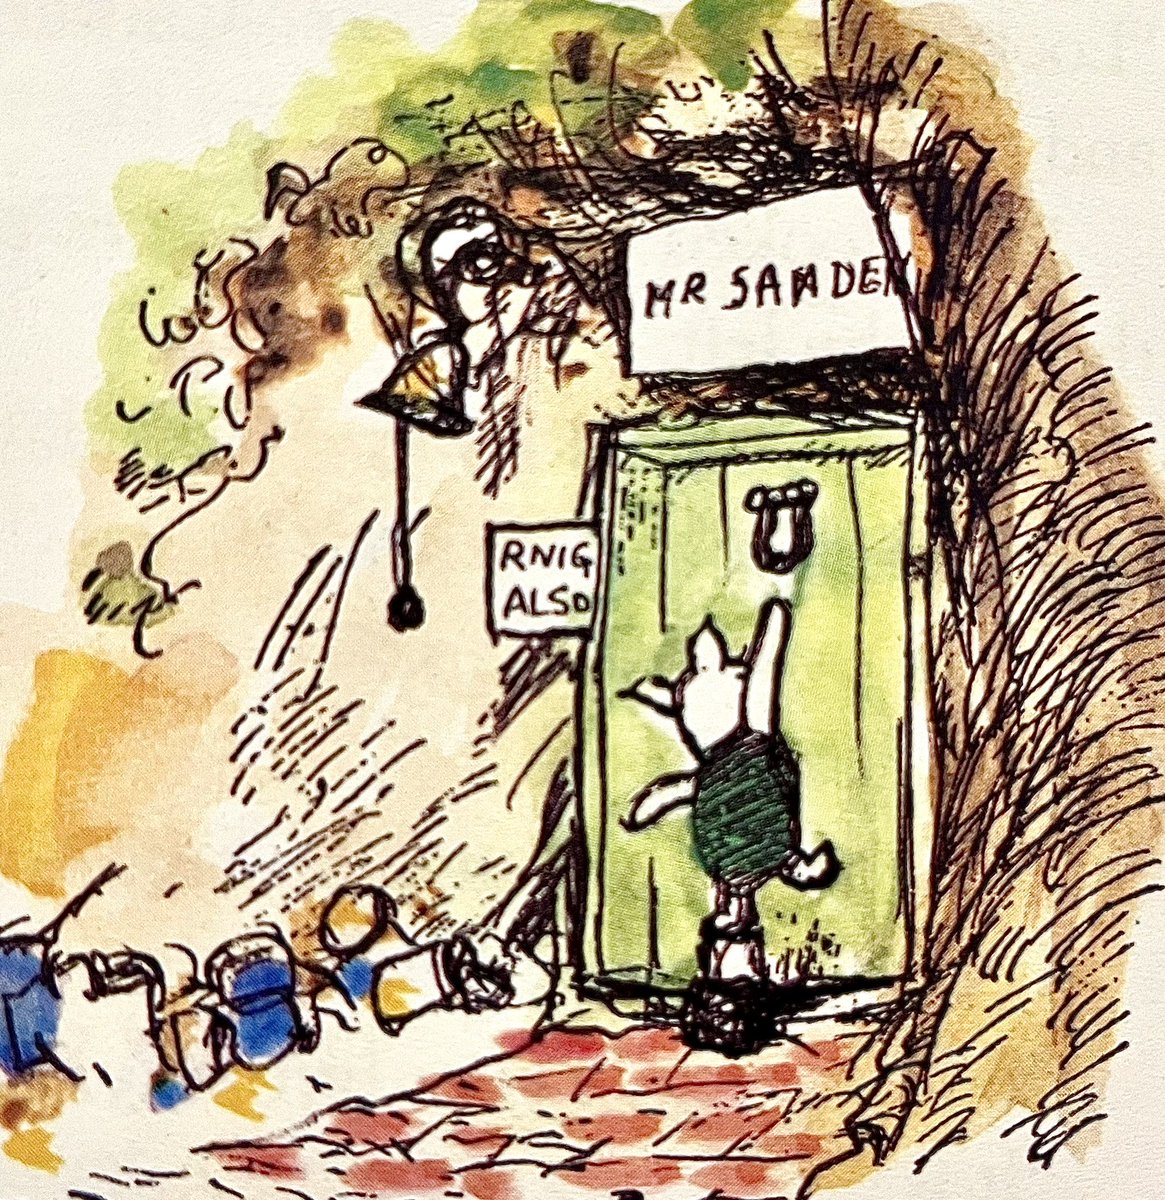 Outside his house he found Piglet, jumping up and down trying to reach the knocker. “Hello. Let me do it for you,” said Pooh kindly. He reached up and knocked at the door. “What a long time whoever lives here is answering this door.” “But, Pooh, it’s your own house!” ~A.A.Milne